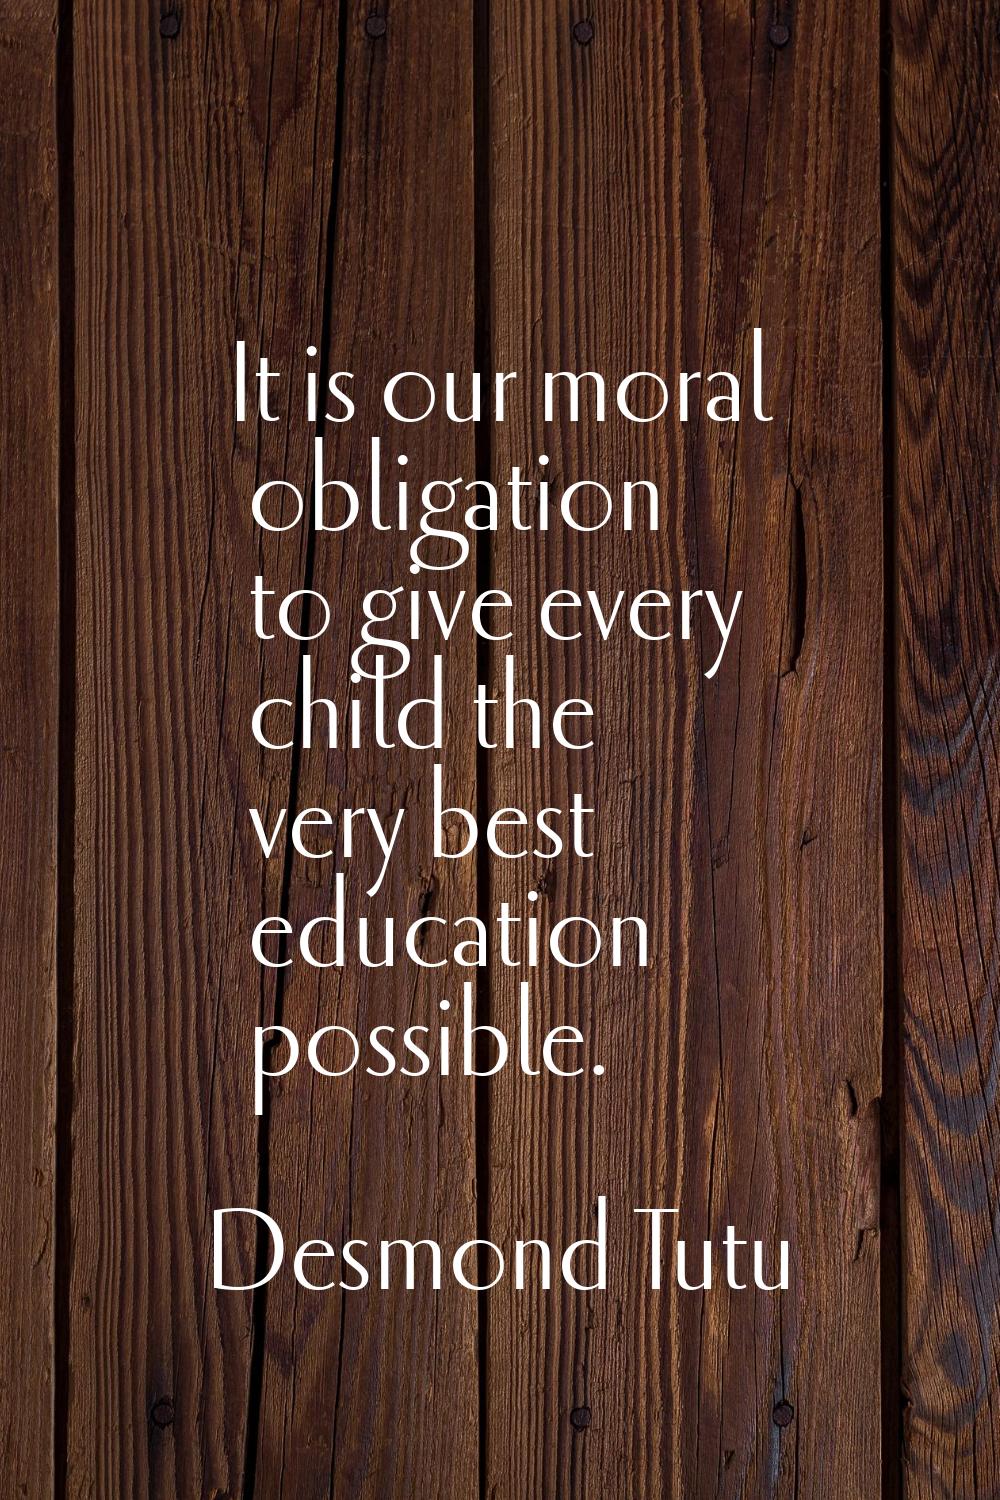 It is our moral obligation to give every child the very best education possible.